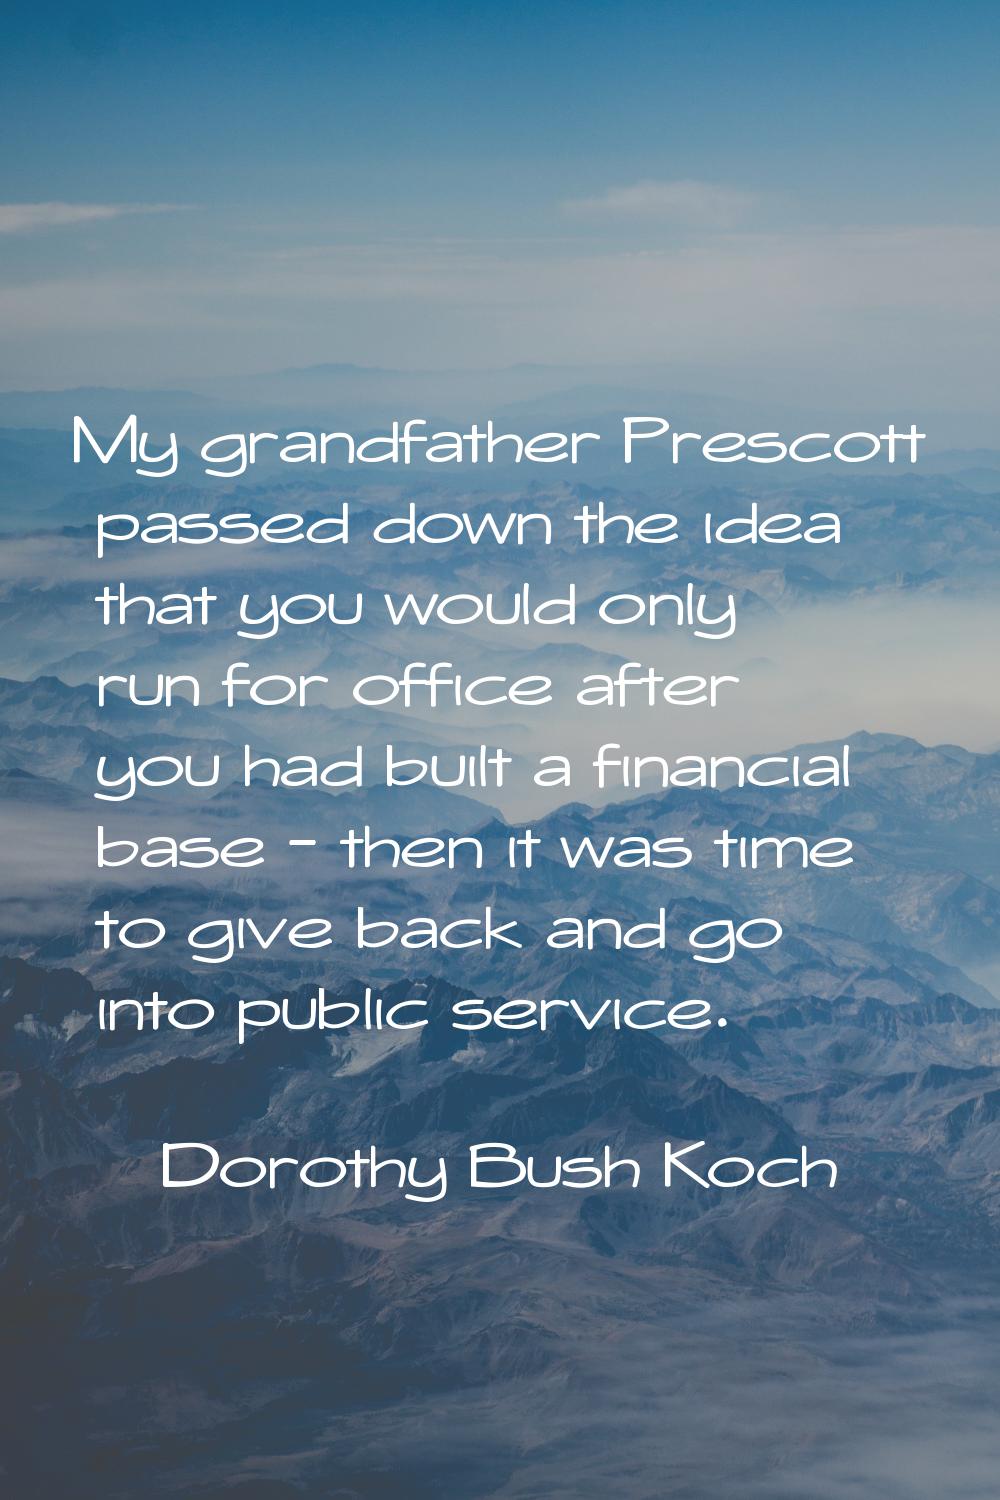 My grandfather Prescott passed down the idea that you would only run for office after you had built